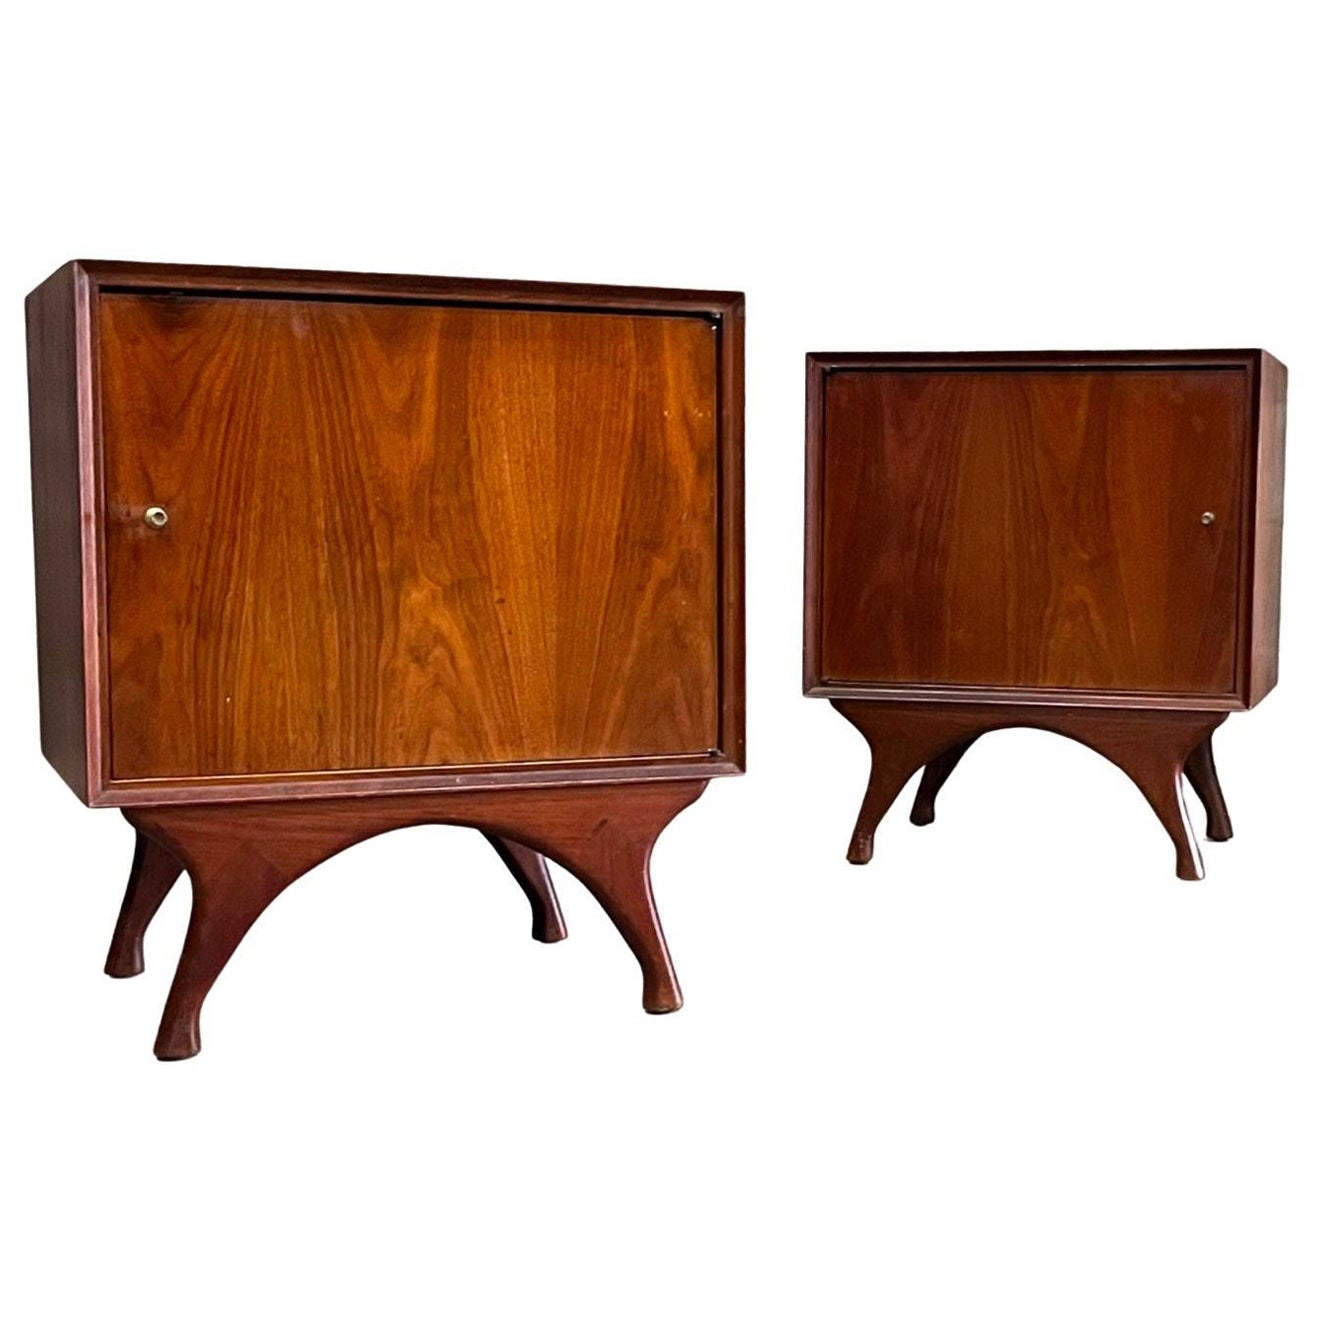 Sculpted and Minimalist Vintage Mid Century Modern Pair of Nightstands c. 1960s For Sale